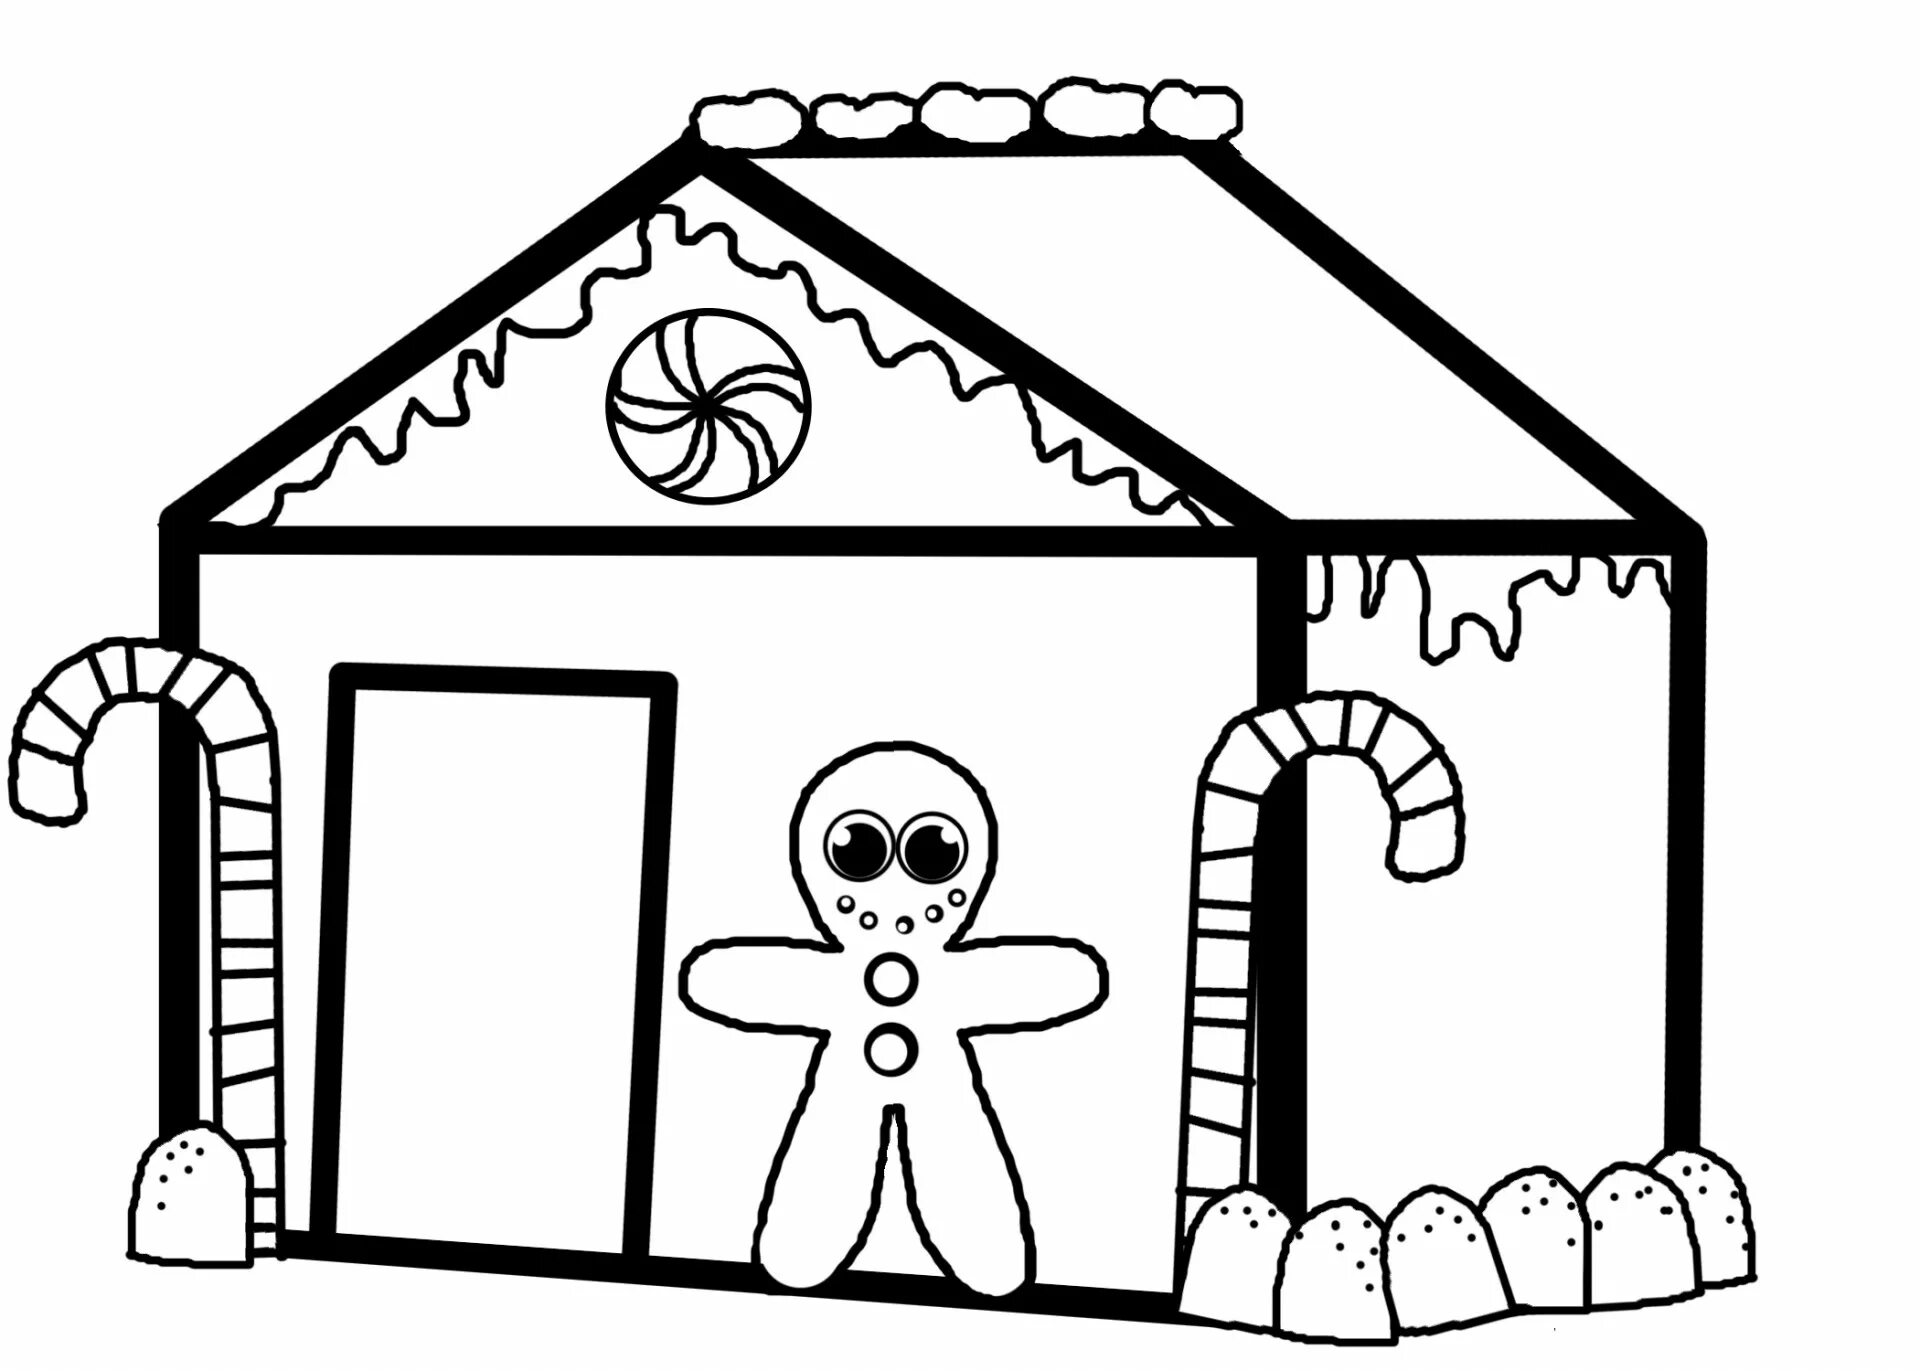 Fun house coloring pages for 4-5 year olds